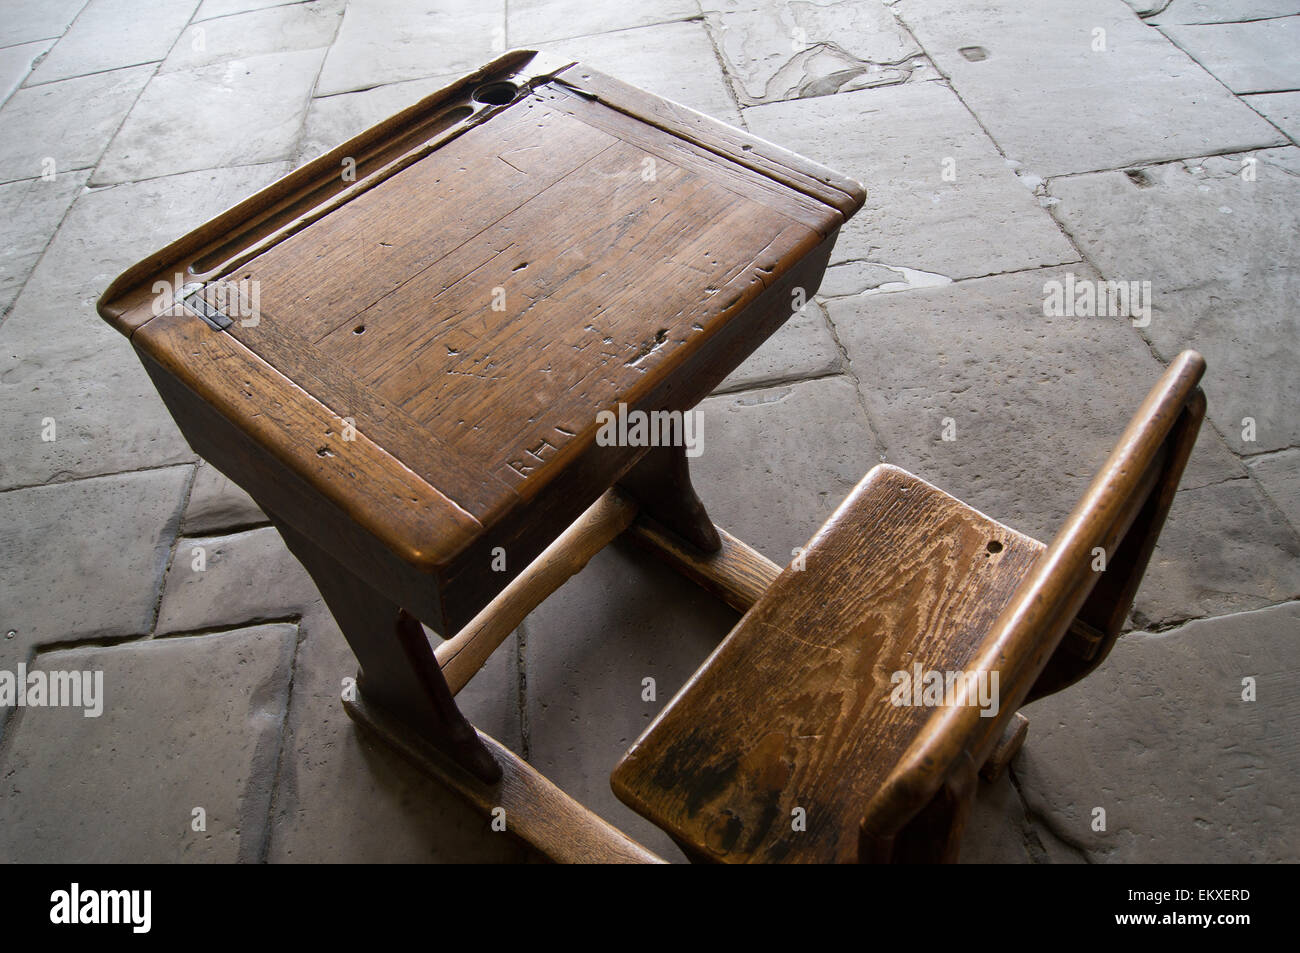 An Old Worn Style School Desk And Chair On A Stone Floor Stock